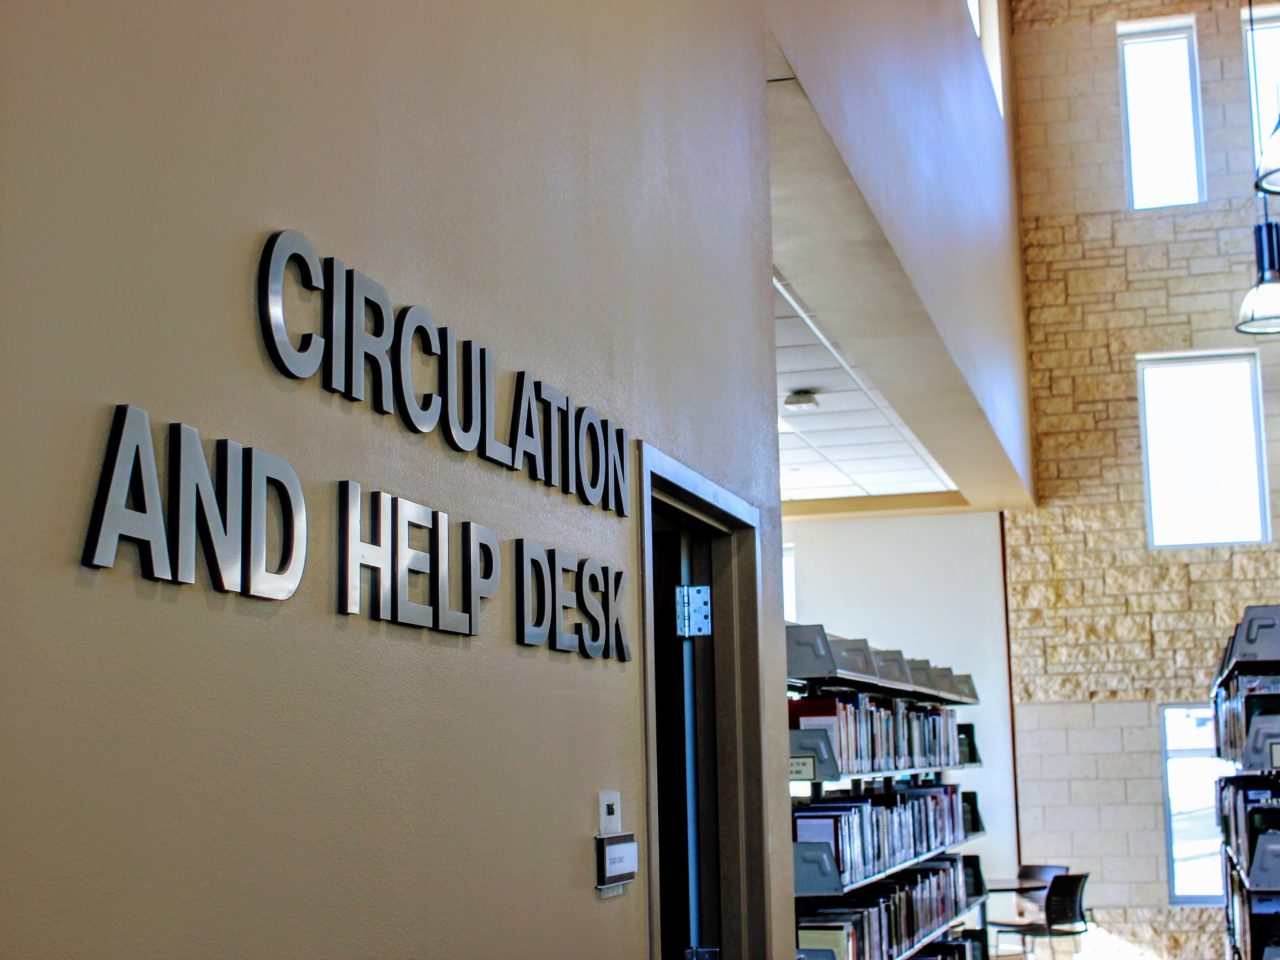 Letters on painted wall in Library read "Circulation Desk"